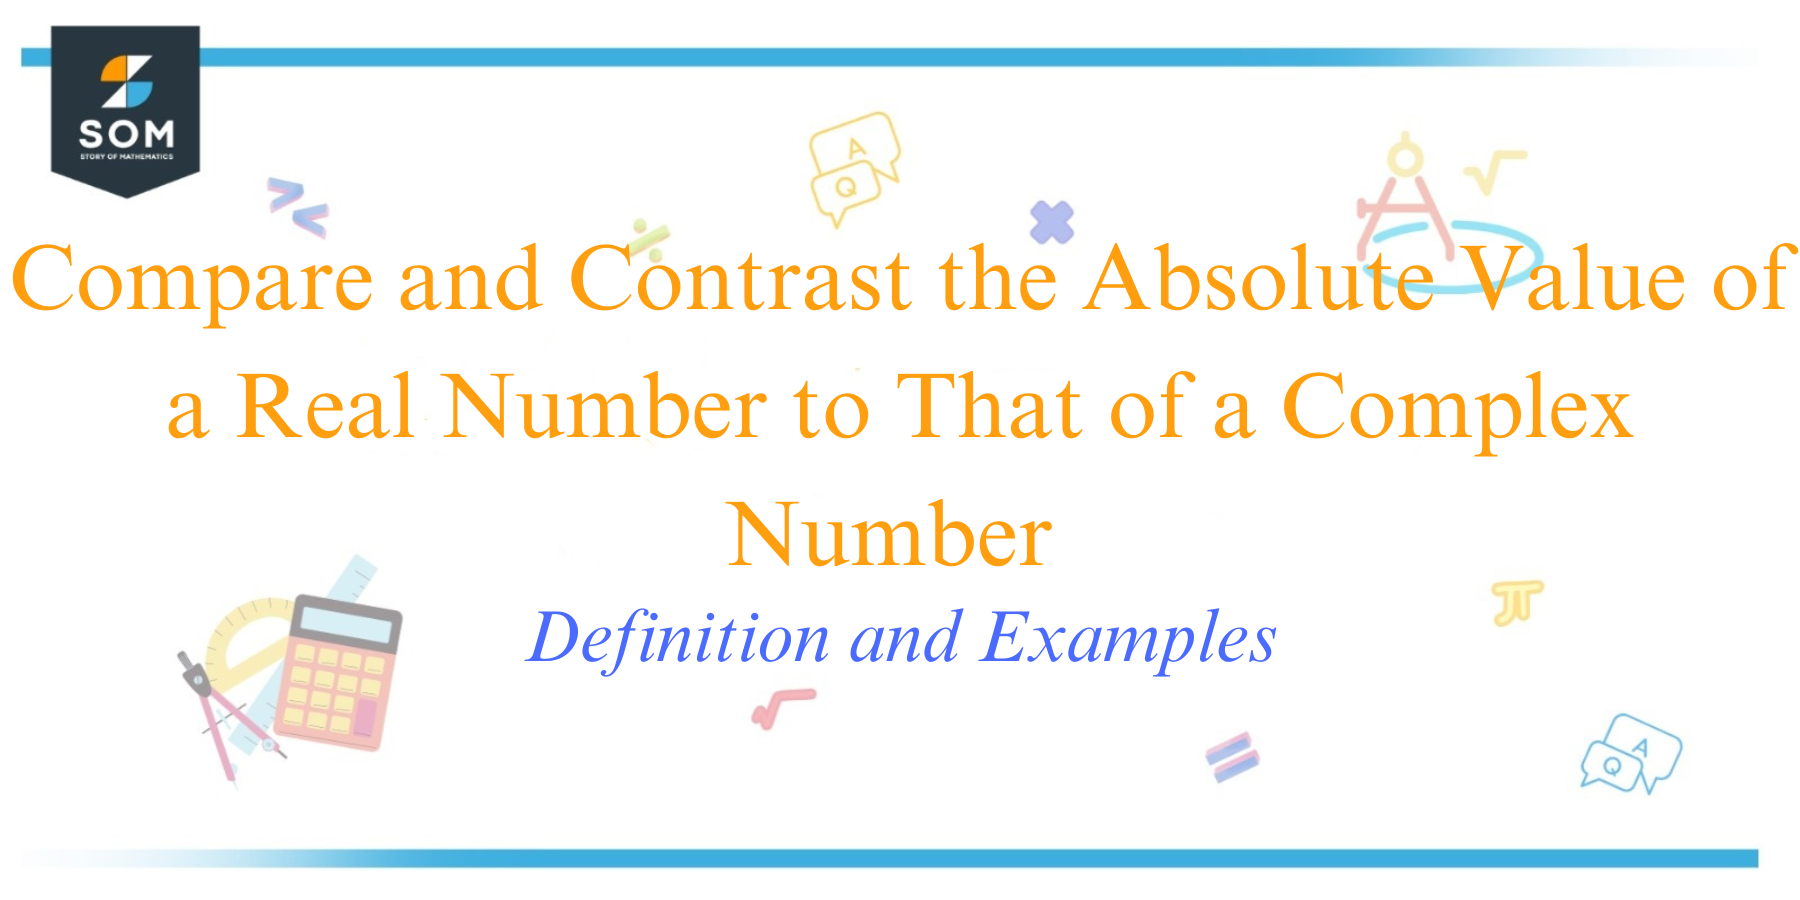 Compare and Contrast the Absolute Value of a Real Number to That of a Complex Number Definition and Examples 1